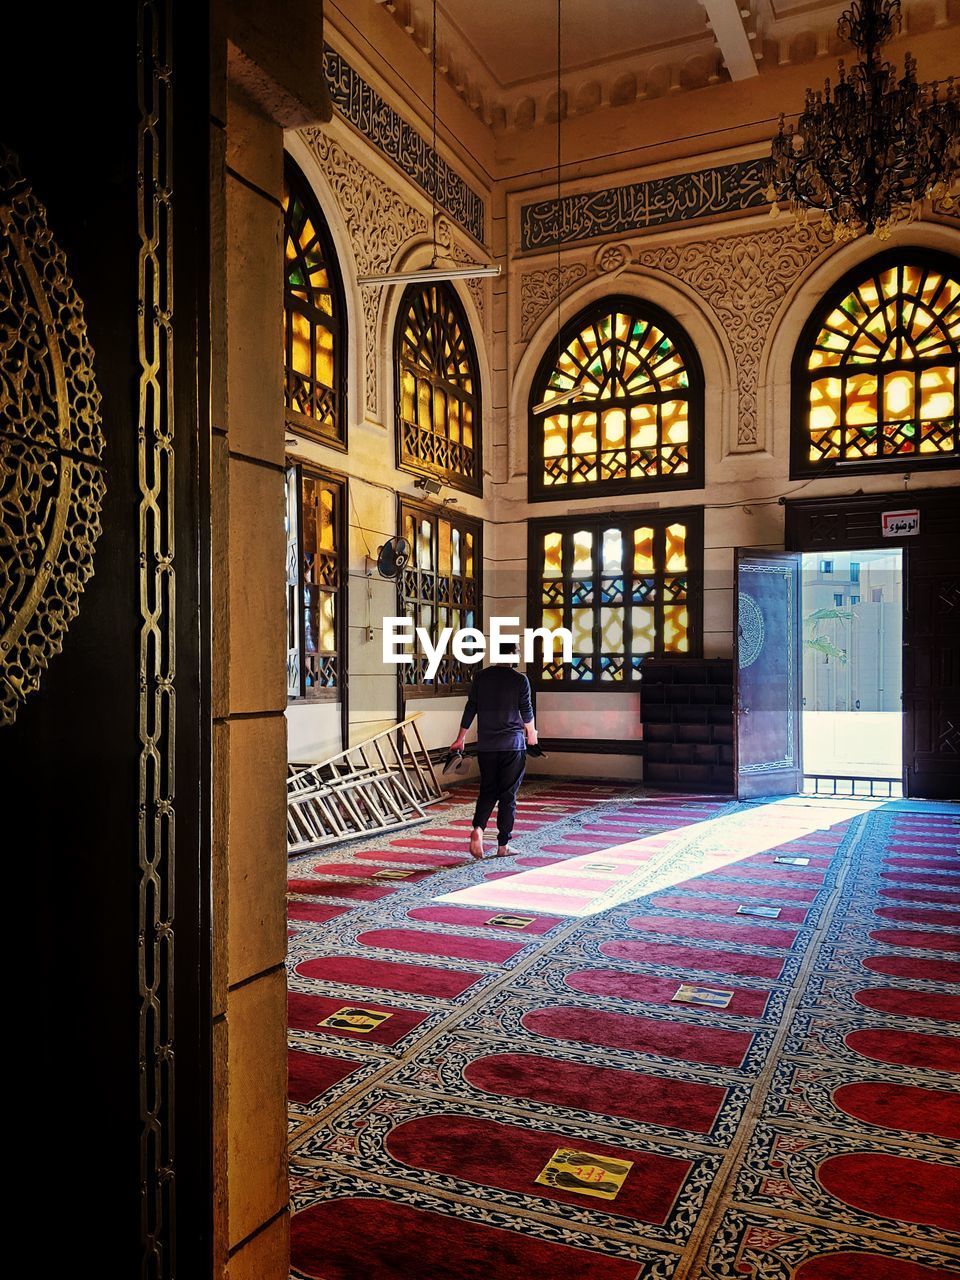 Fascinating entrance of a mosque